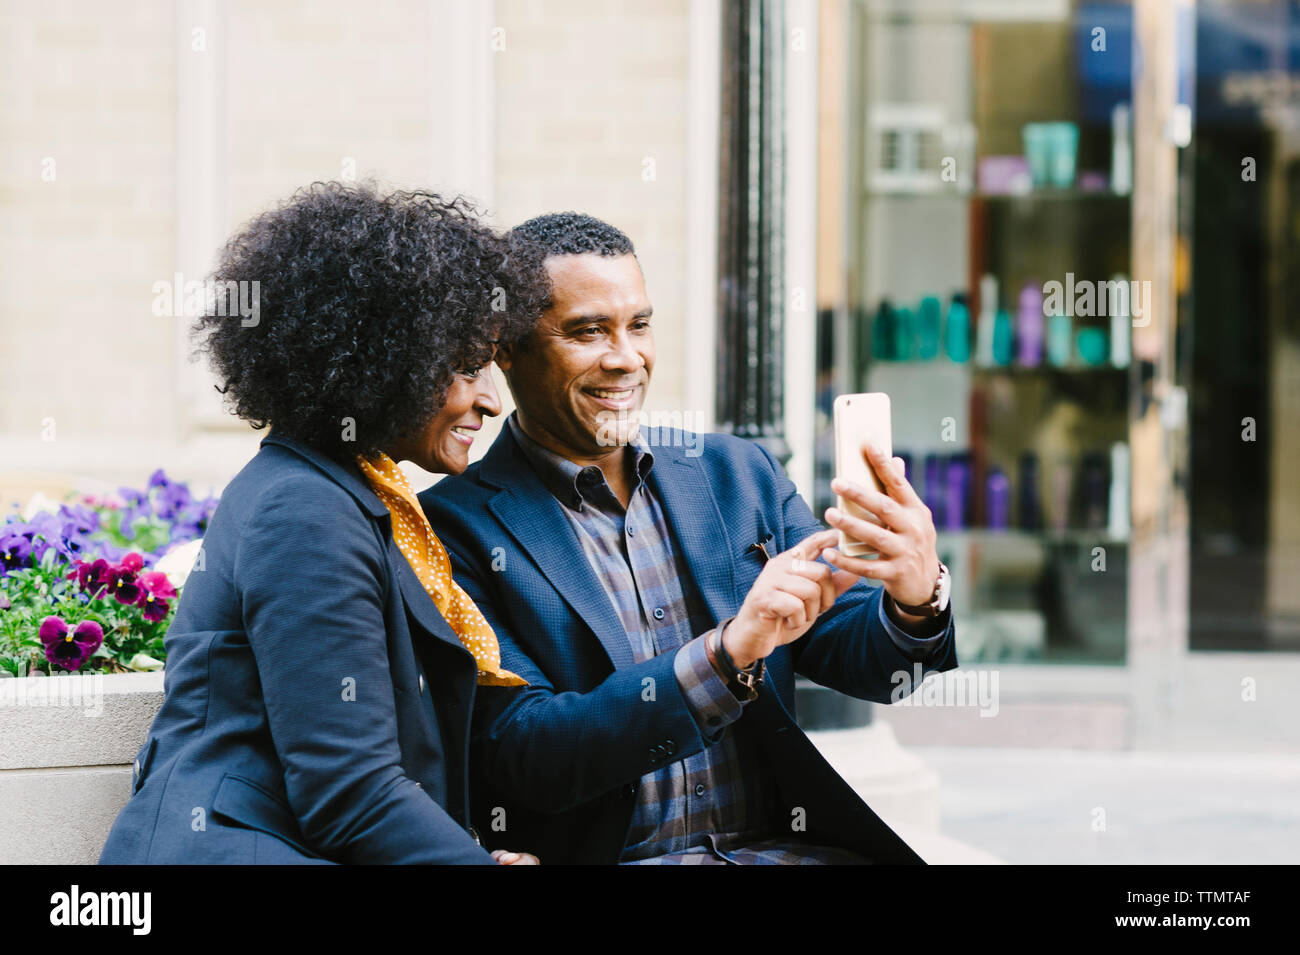 Happy couple taking selfie through mobile phone while sitting on seat in city Stock Photo